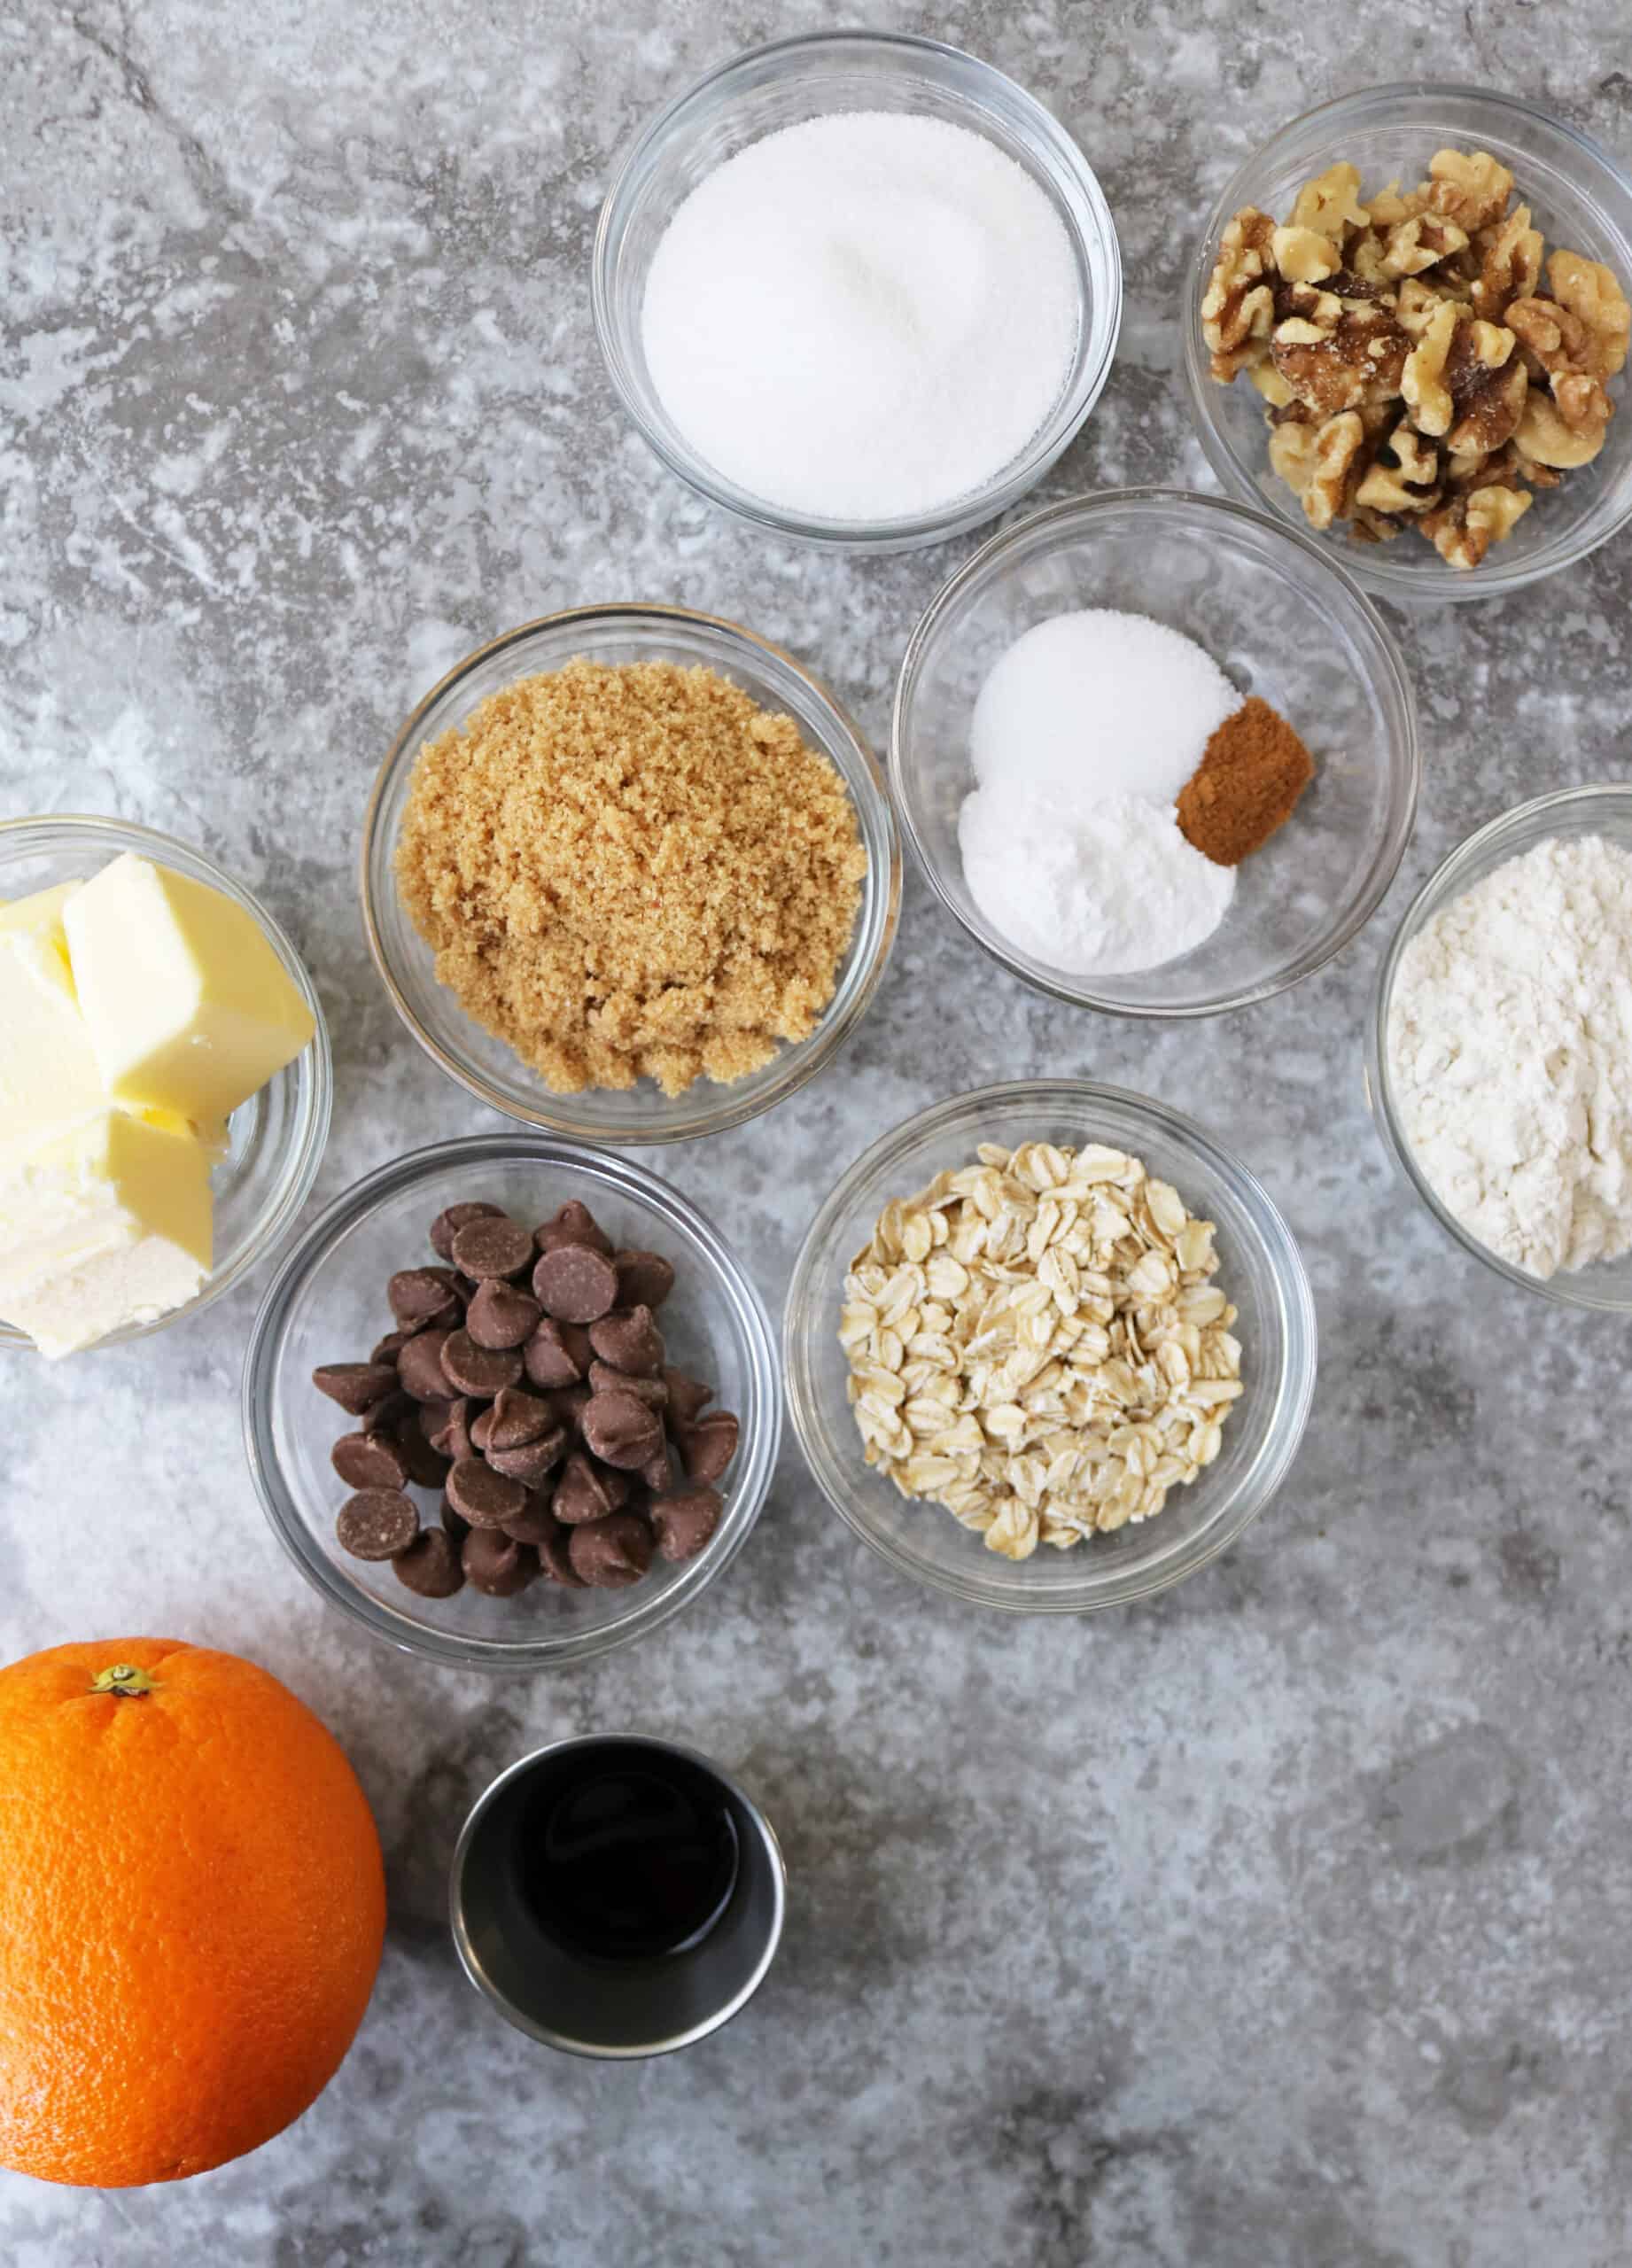 Image of all the ingredients needed to make chocolate chip cookies with orange.